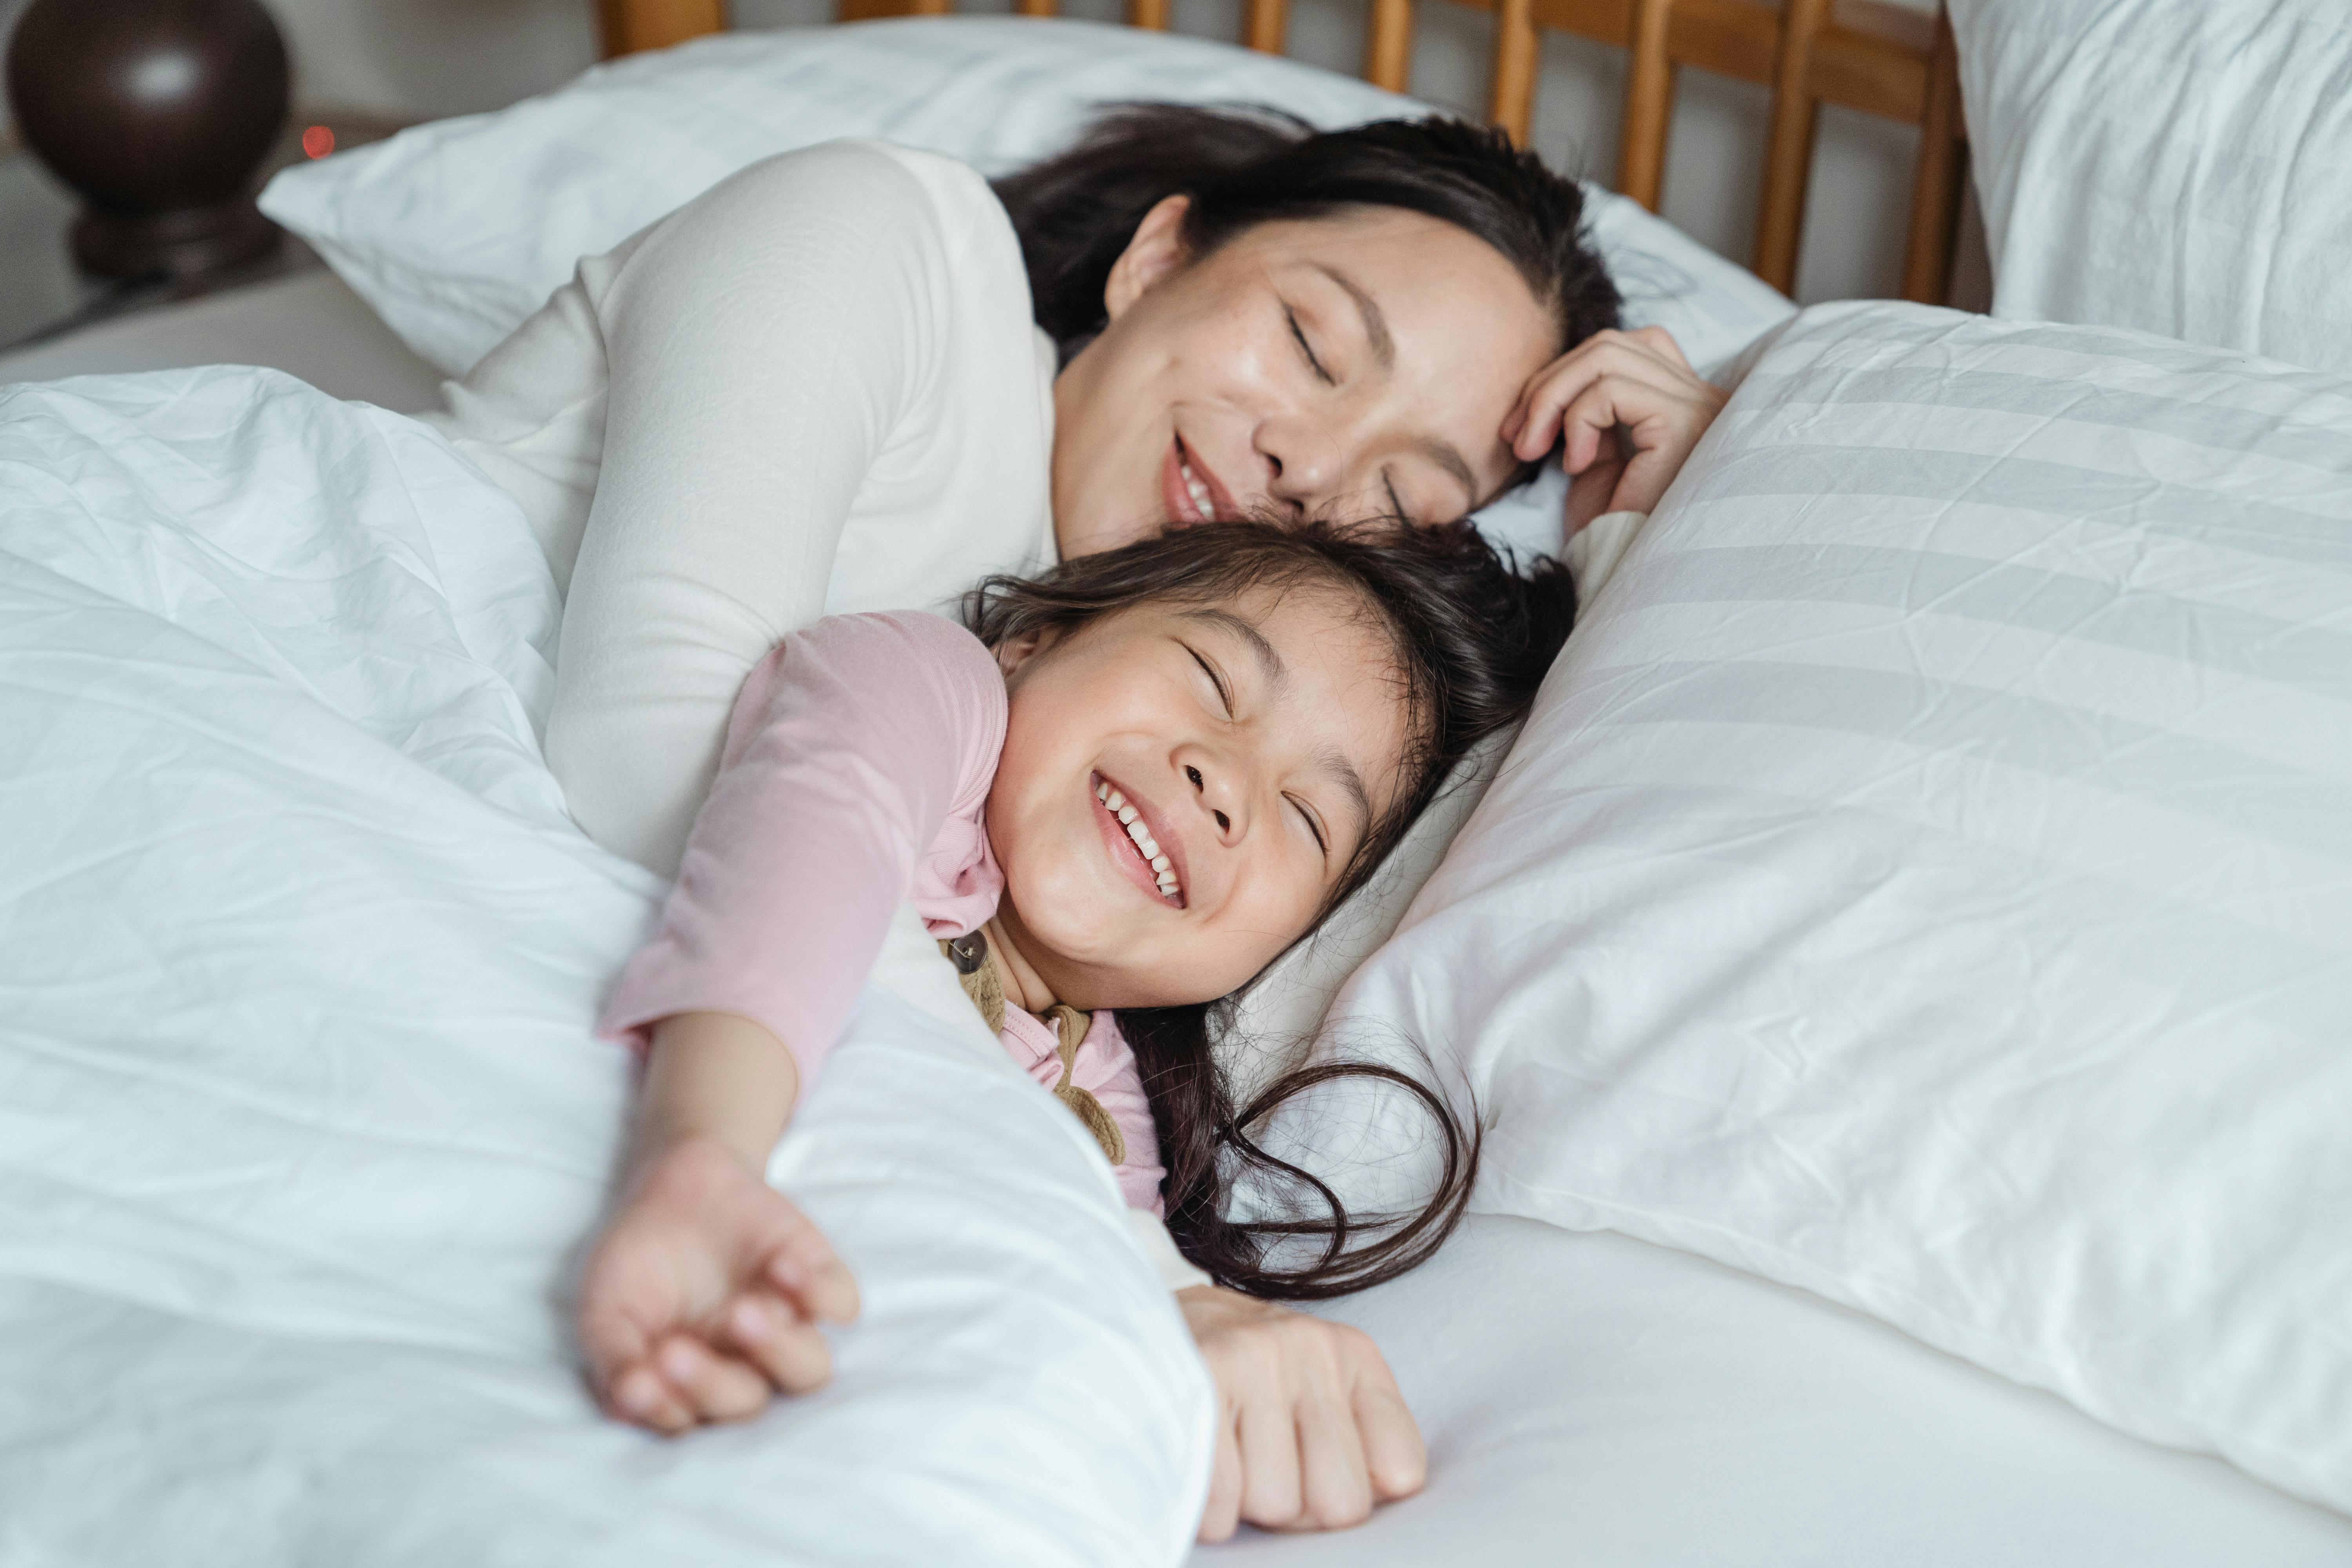 A woman smiling while comforting a little girl while they lay in a bed together | Source: Pexels